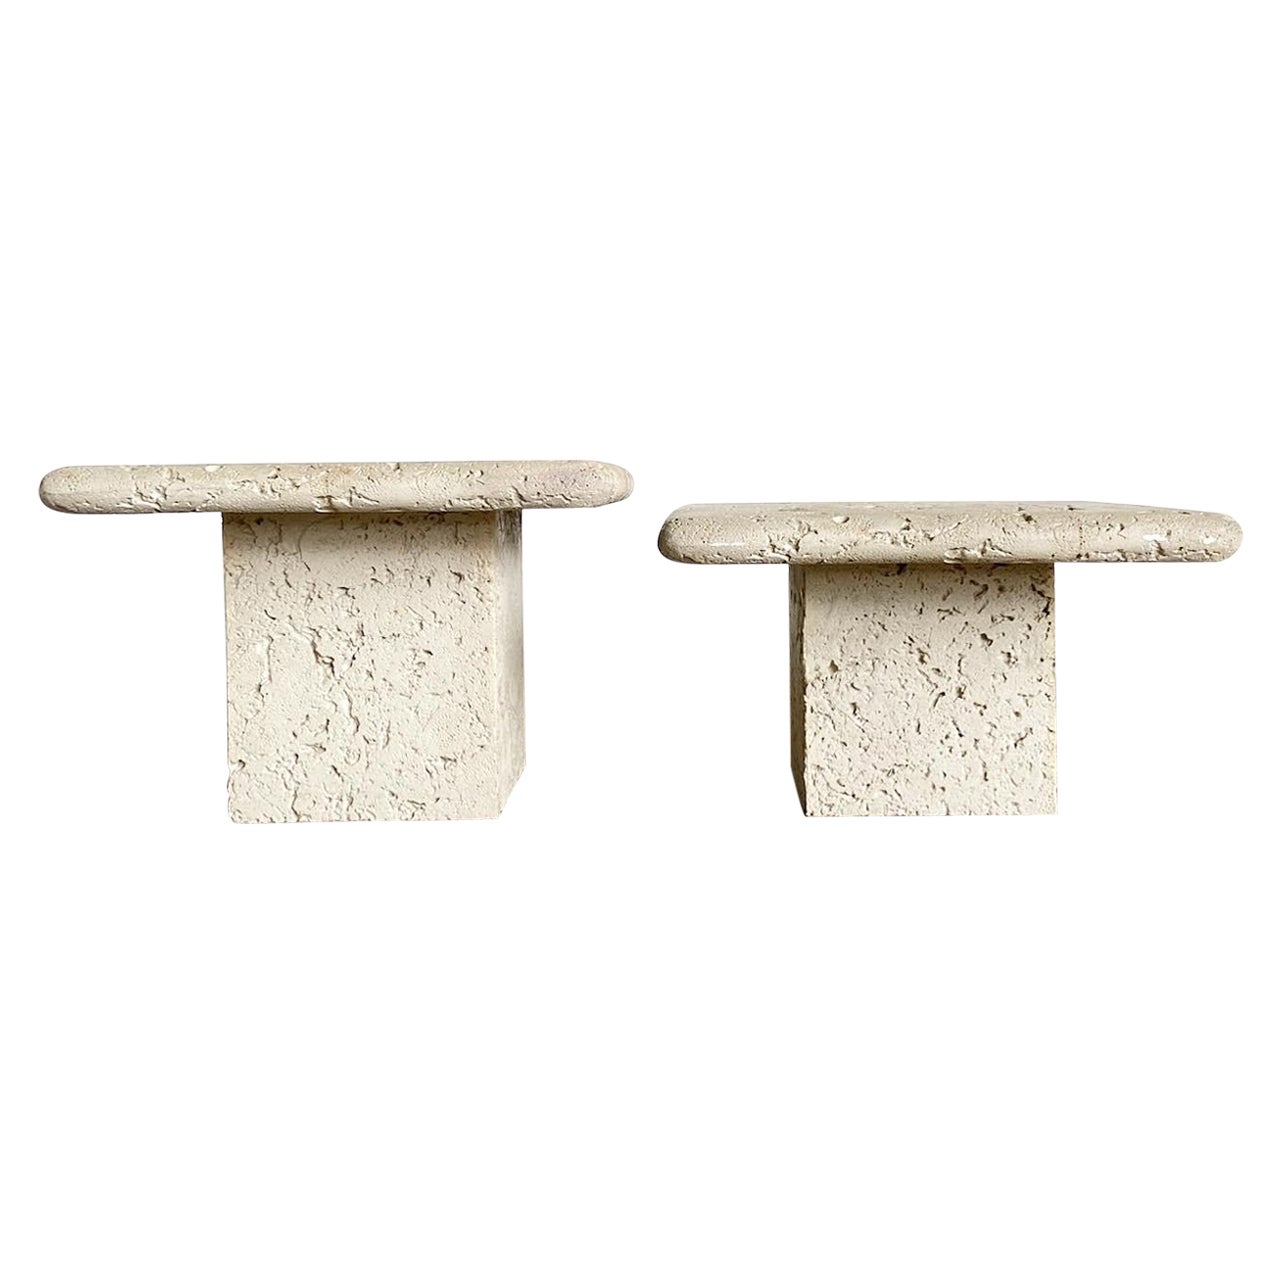 Faux Coquina Coral Cast Cement Square Top Mushroom Nesting Tables - a Pair